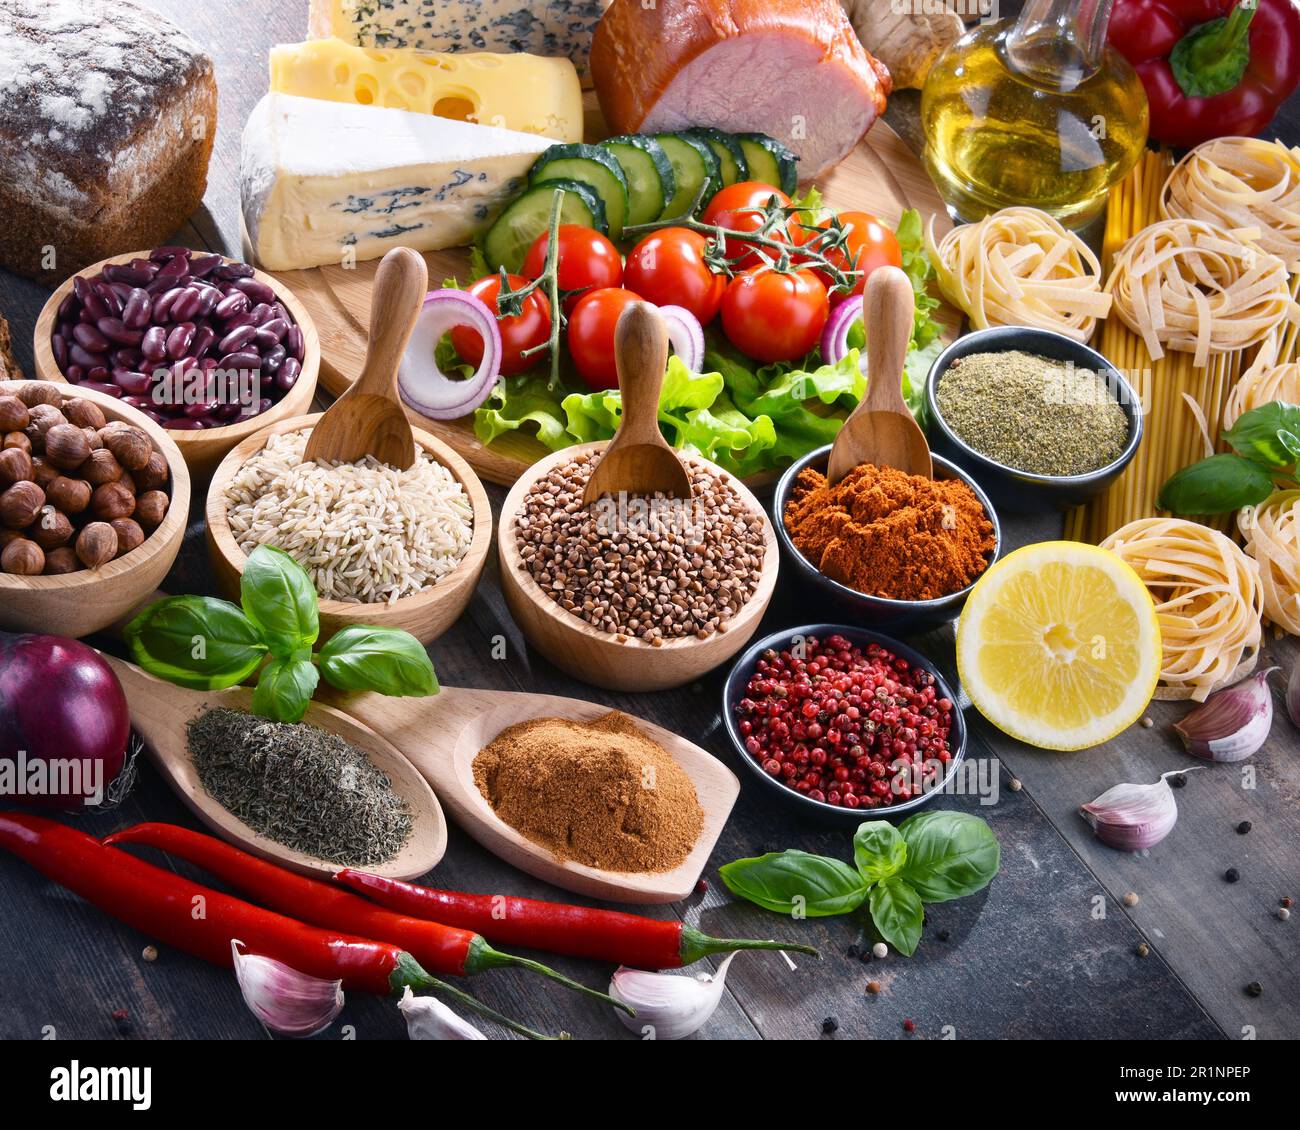 Composition with assorted organic food products on the table Stock Photo